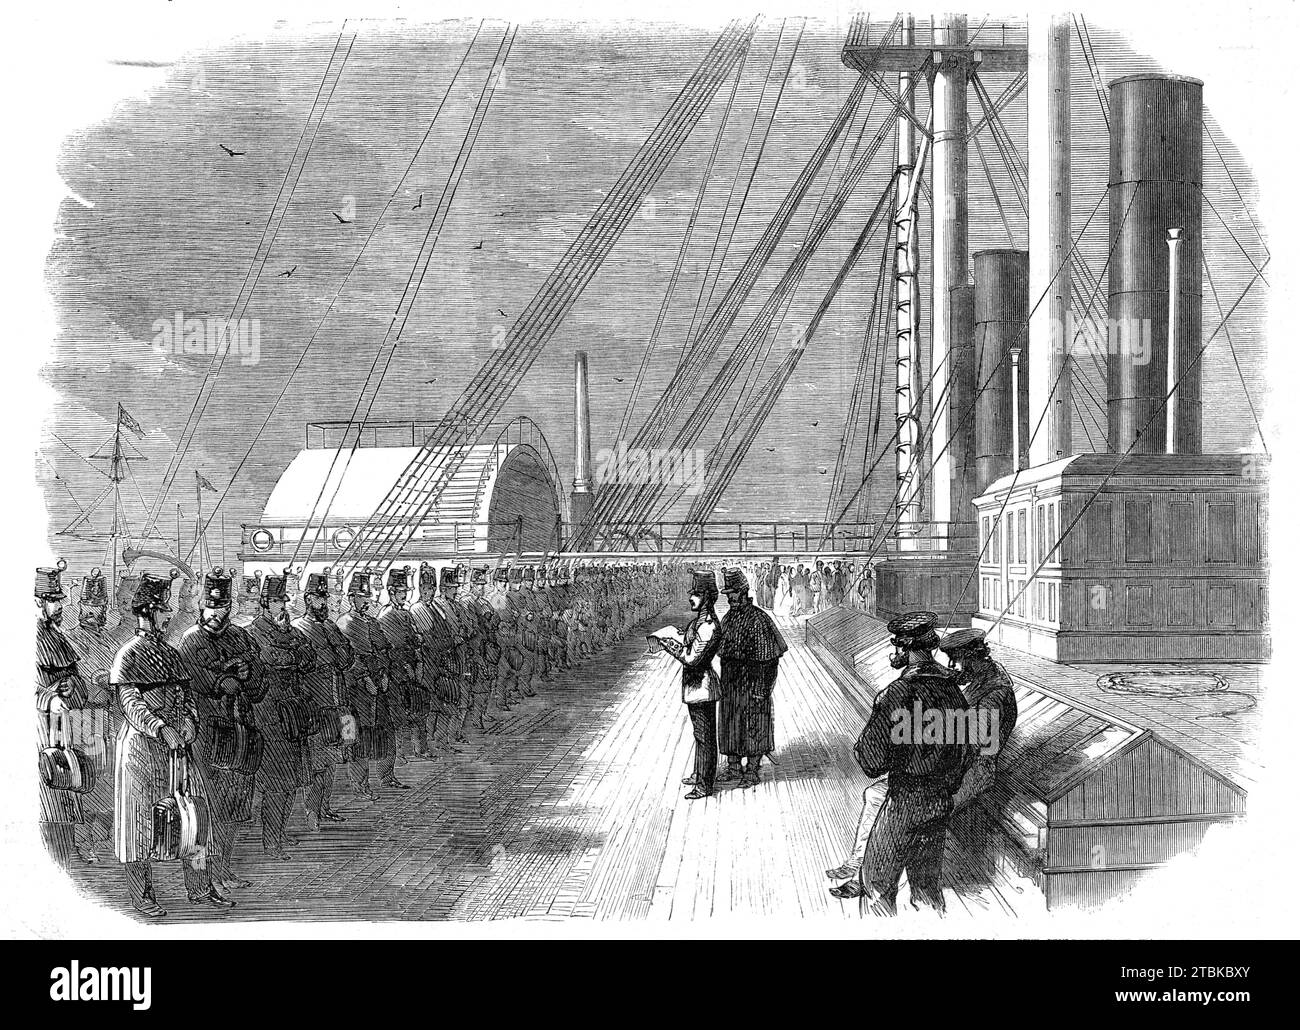 Calling the roll on board the Great Eastern shortly before her departure from the Mersey with troops for Canada, 1861. 'Shortly after noon on Thursday week the Great Eastern sailed out of the Mersey on her voyage to Quebec with troops to reinforce the Canadian garrisons. The day was cloudless, there was brilliant sunshine, and the piers and dock walls for five miles, as well as the landing-stages, were lined with spectators, who, as the great ship passed them, responded most heartily to the cheers raised by the soldiers who thronged the deck and the lower portions of the rigging. As she passed Stock Photo